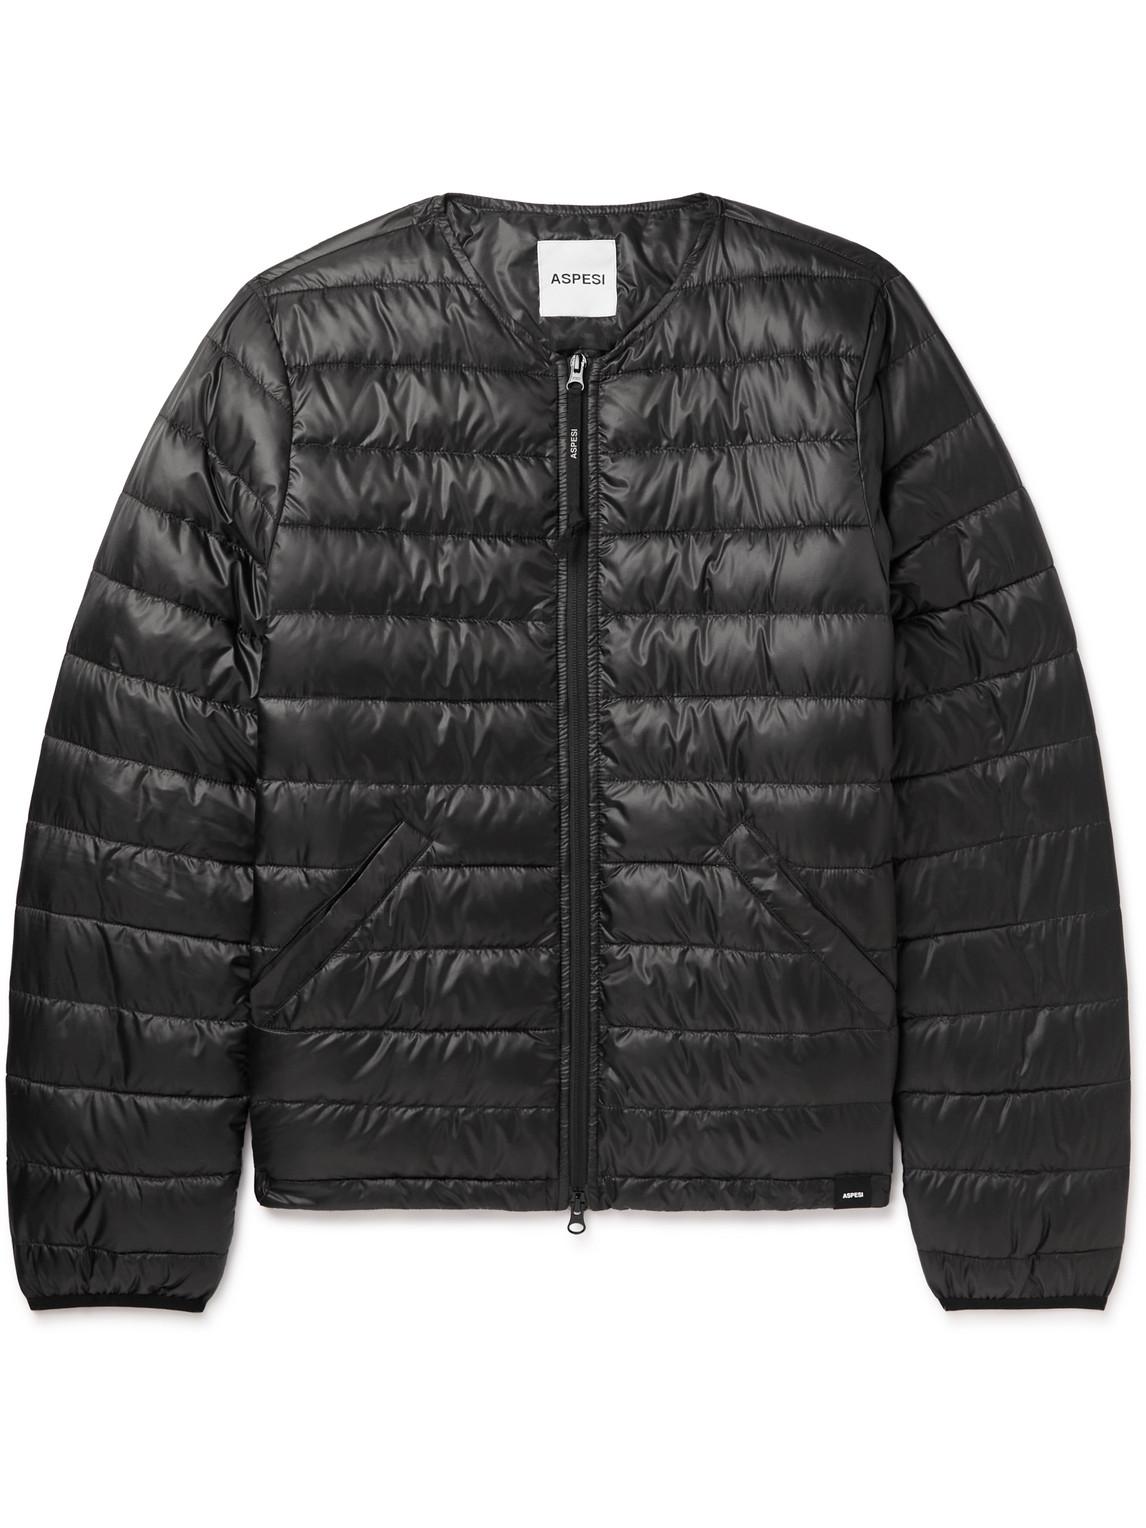 Aspesi Quilted Shell Down Bomber Jacket in Black for Men | Lyst